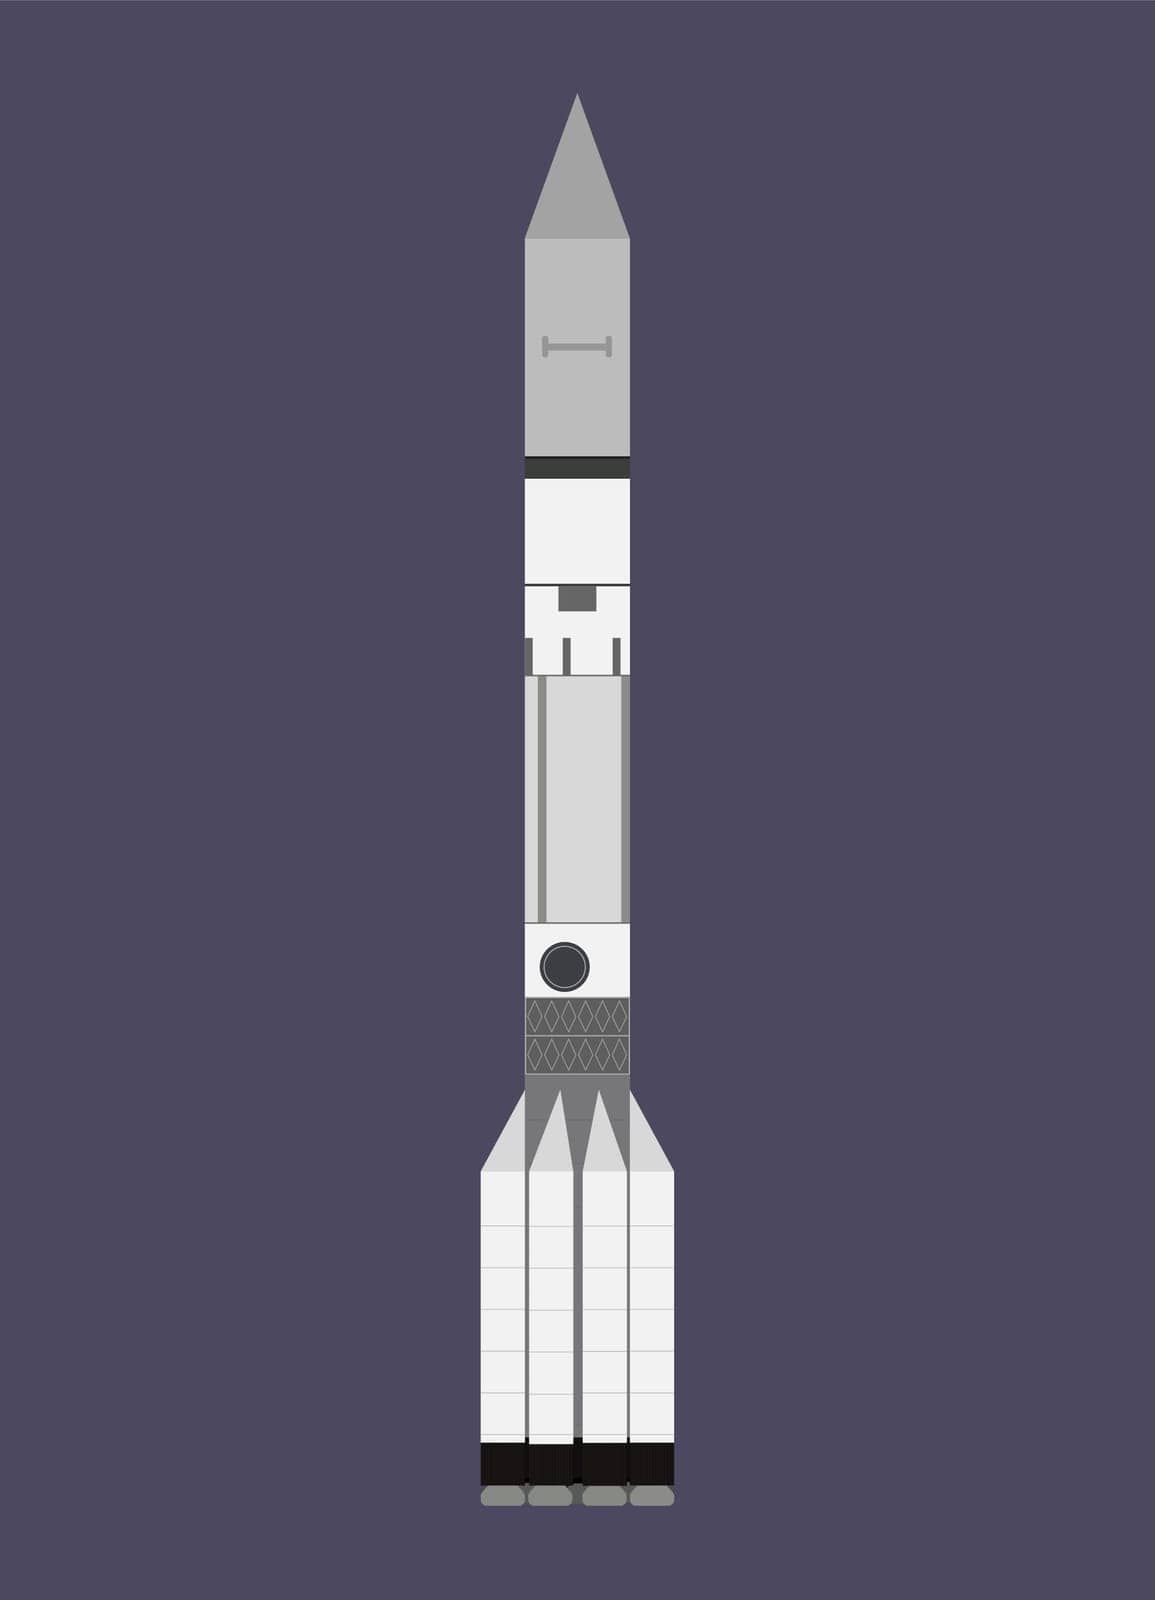 Space cosmic rocket, spaceship, spacecraft astronautics and space technology. Vertical astronaut flight ship, exploration. Royalty free isolated flat design vector illustration.